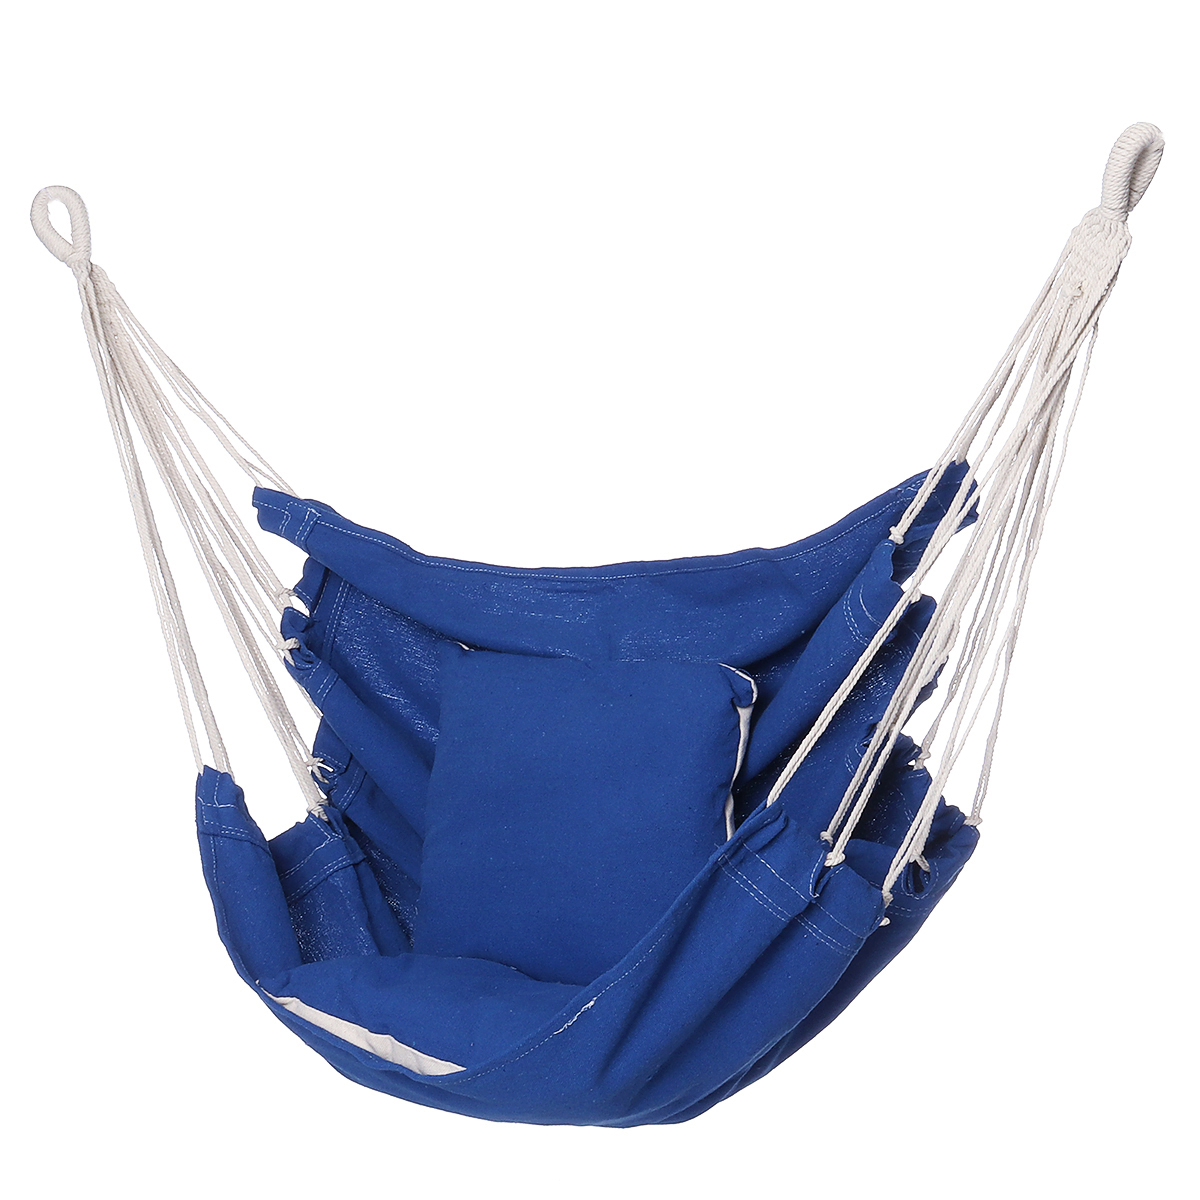 Camping-Hammock-Chair-Swing-Seat-Indoor-Outdoor-Folding-Hanging-Chair-with-Ropes-Pillow-1711690-3